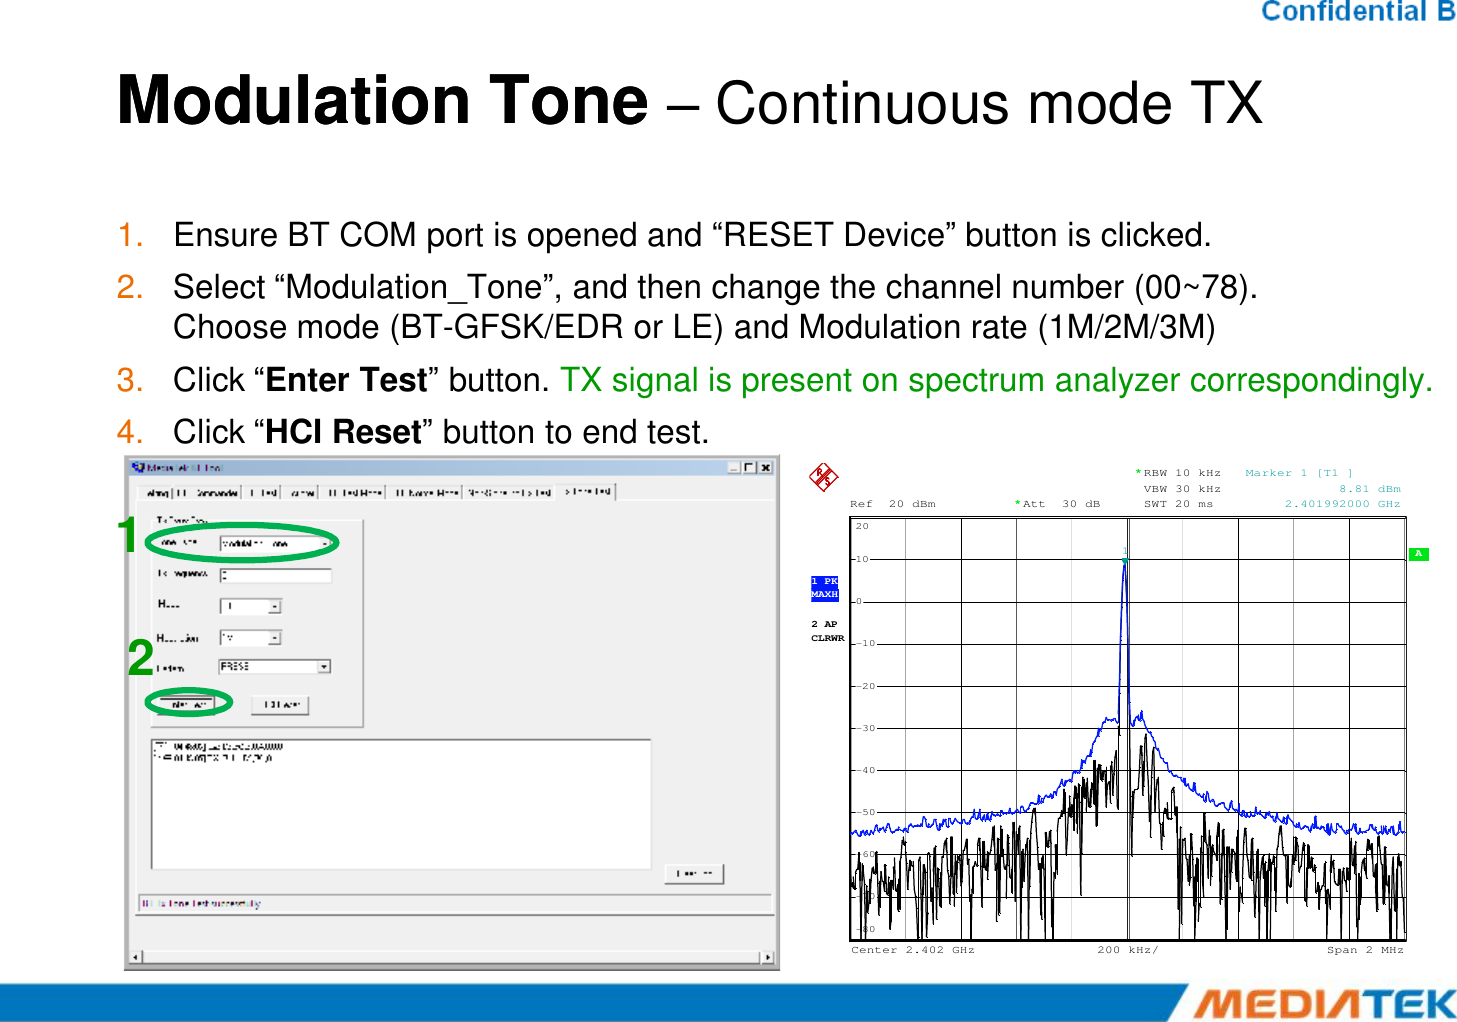 Modulation Tone Modulation Tone –Continuous mode TX1. Ensure BT COM port is opened and “RESET Device” button is clicked.2. Select “Modulation_Tone”, and then change the channel number (00~78).Choose mode (BT-GFSK/EDR or LE) and Modulation rate (1M/2M/3M)3. Click “Enter Test” button. TX signal is present on spectrum analyzer correspondingly.4. Click “HCI Reset” button to end test.1Ref 20 dBmAtt 30 dB**RBW 10 kHzVBW 30 kHzSWT 20 ms20Marker 1 [T1 ]            8.81 dBm     2.401992000 GHz122 APCLRWR A 200 kHz/Center2.402 GHz Span2 MHz1 PKMAXH-80-70-60-50-40-30-20-10010201